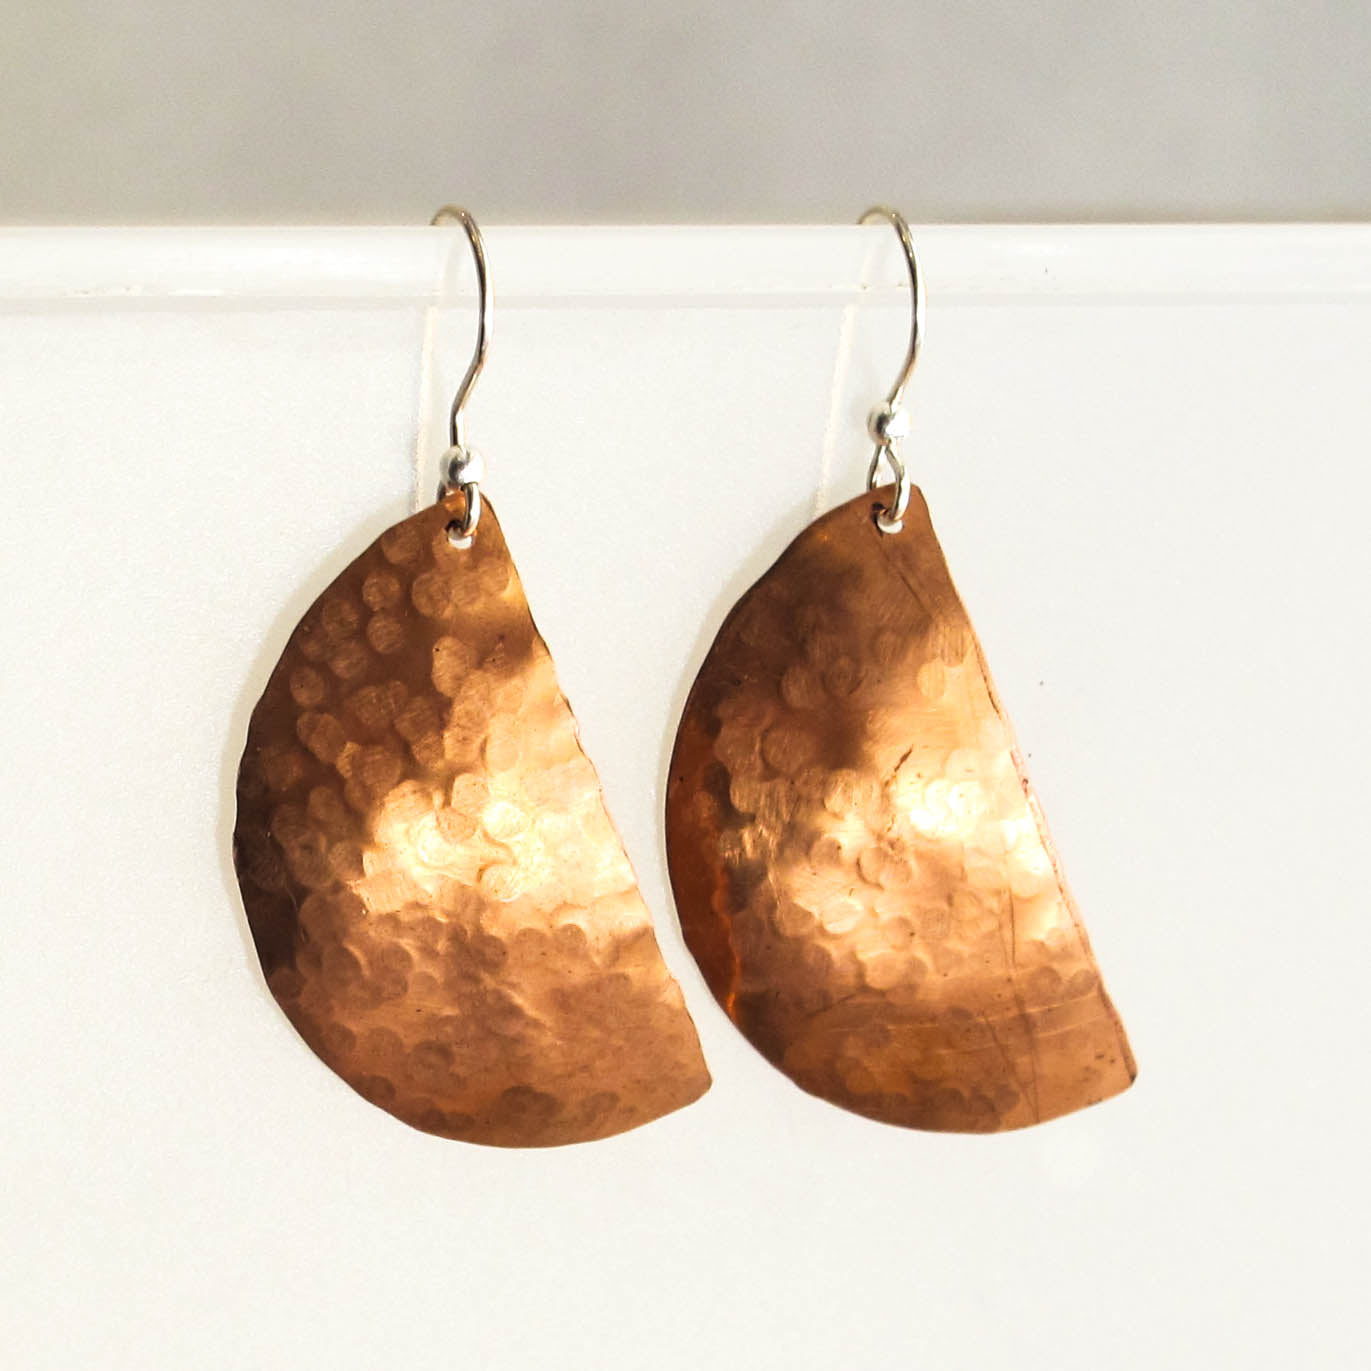 Discover more than 197 hammered copper earrings latest